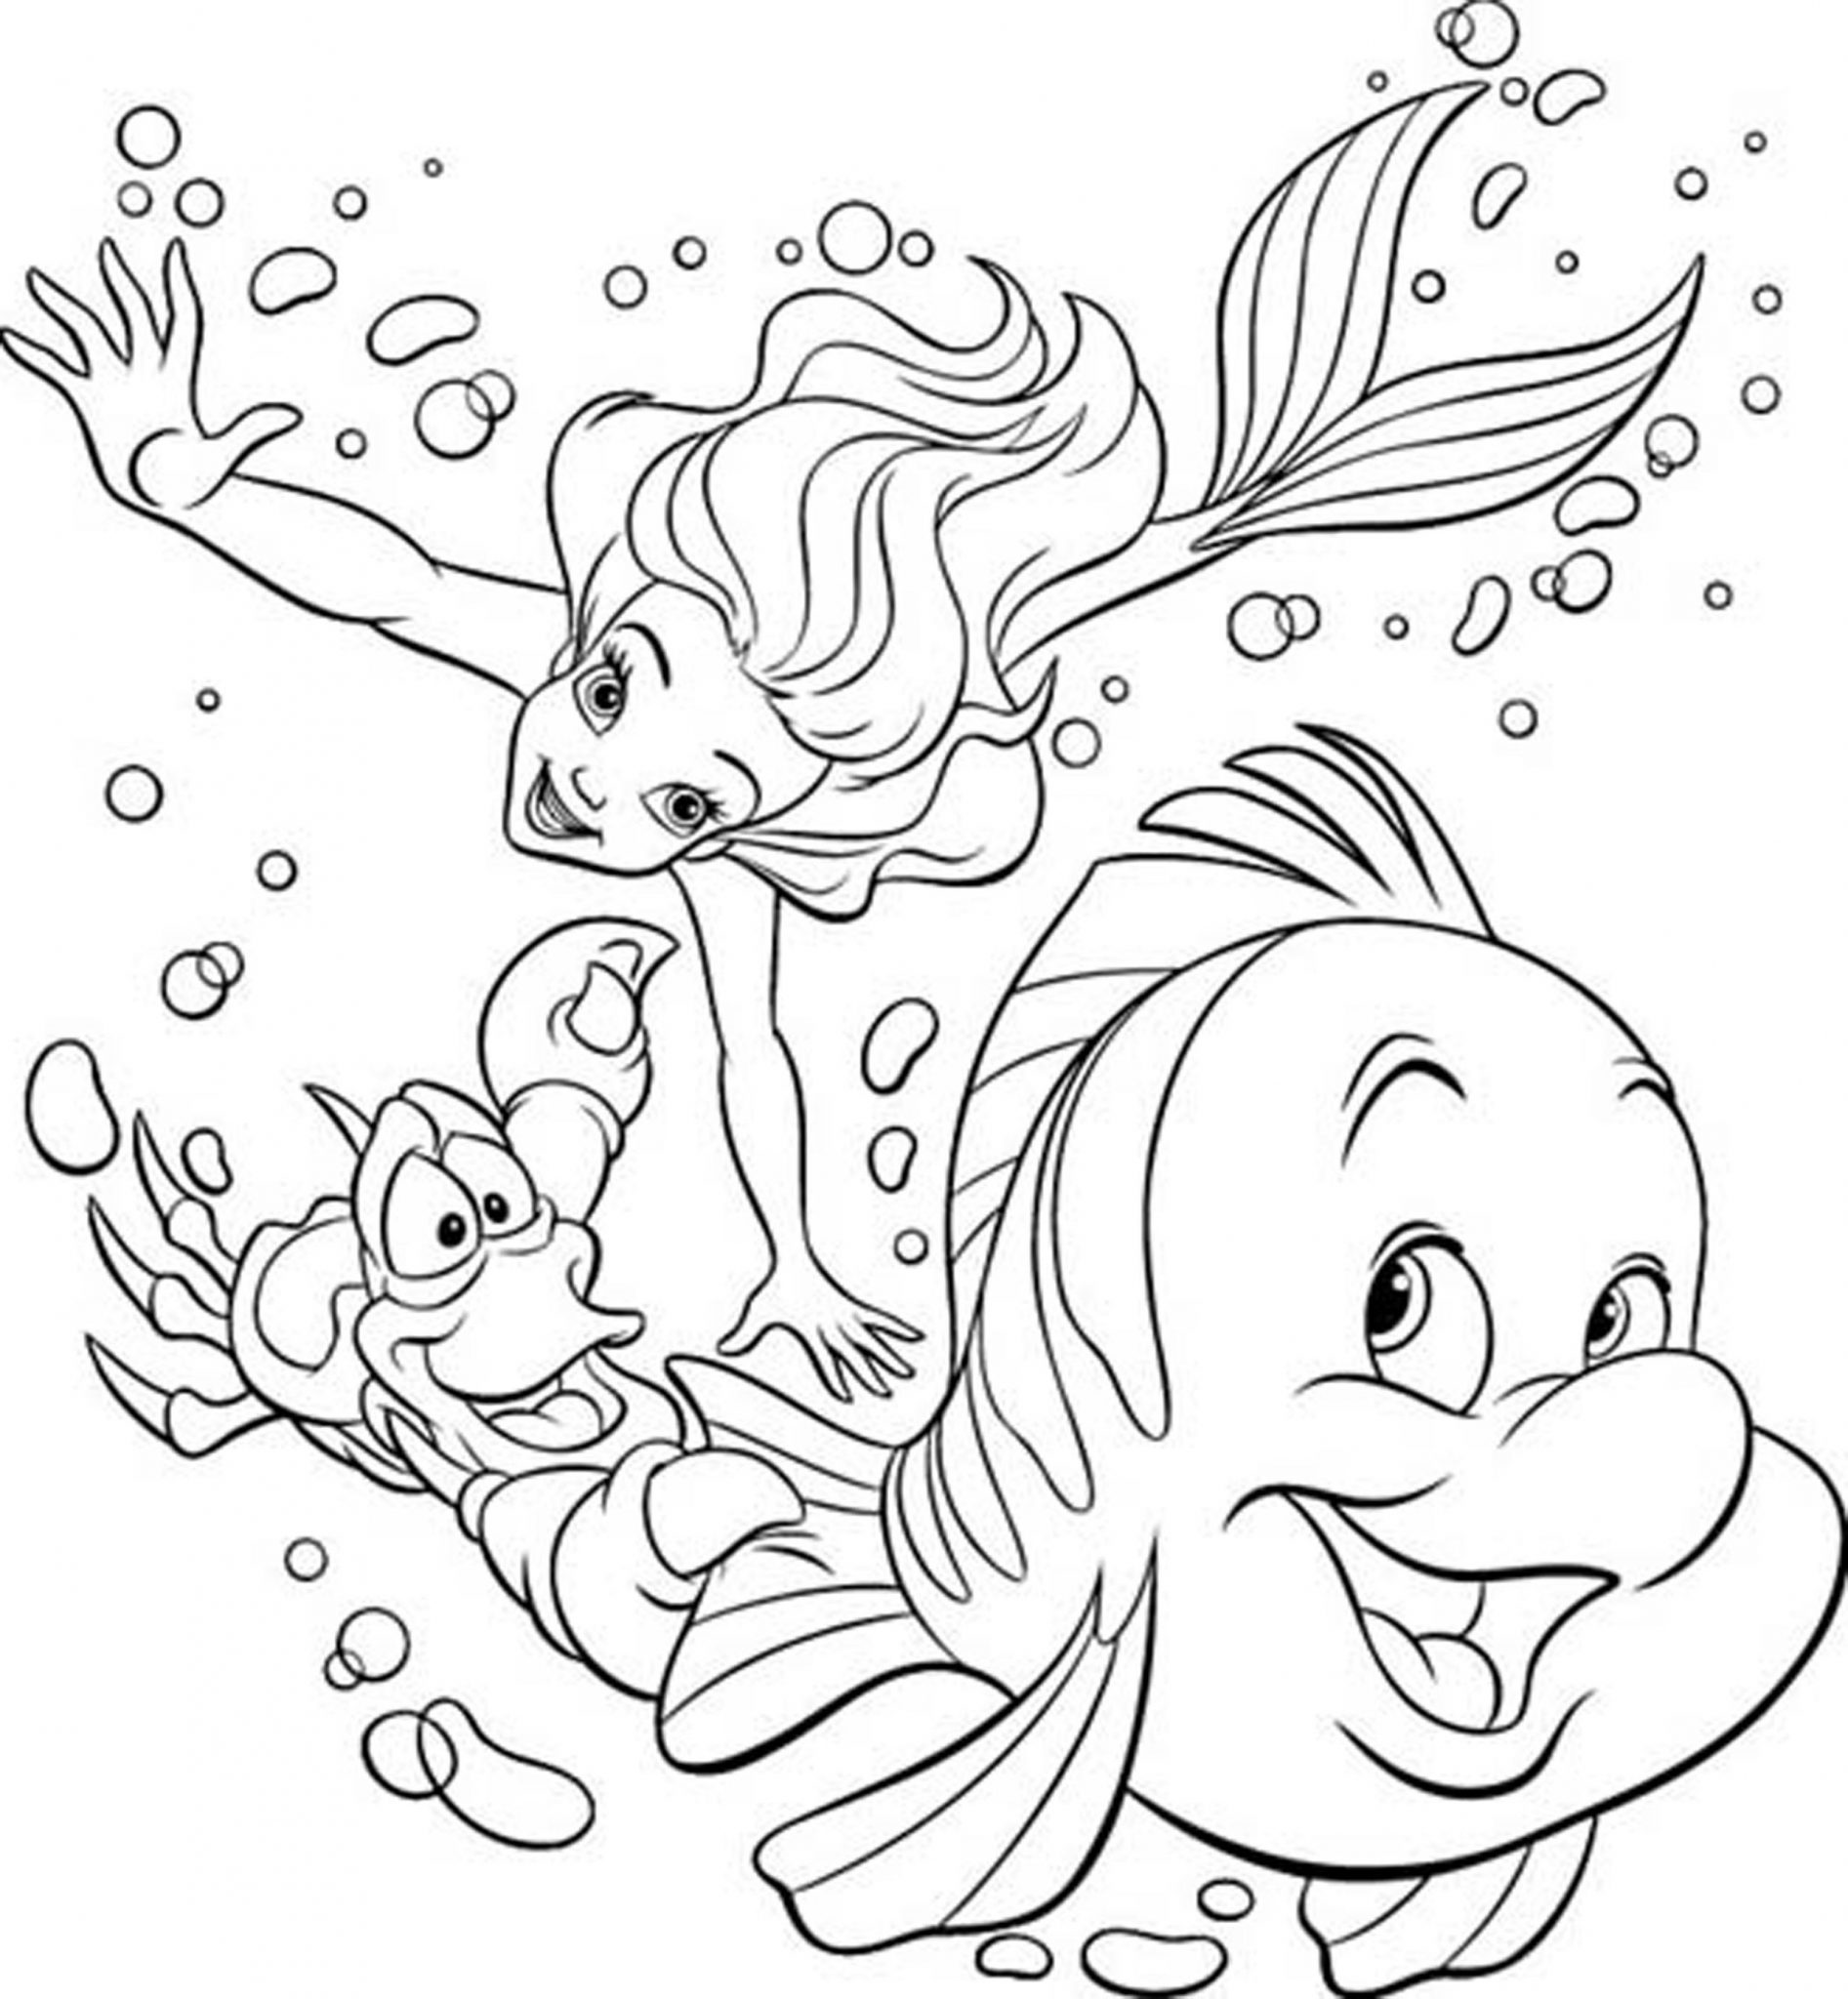 Download disney-colouring-pictures | | BestAppsForKids.com